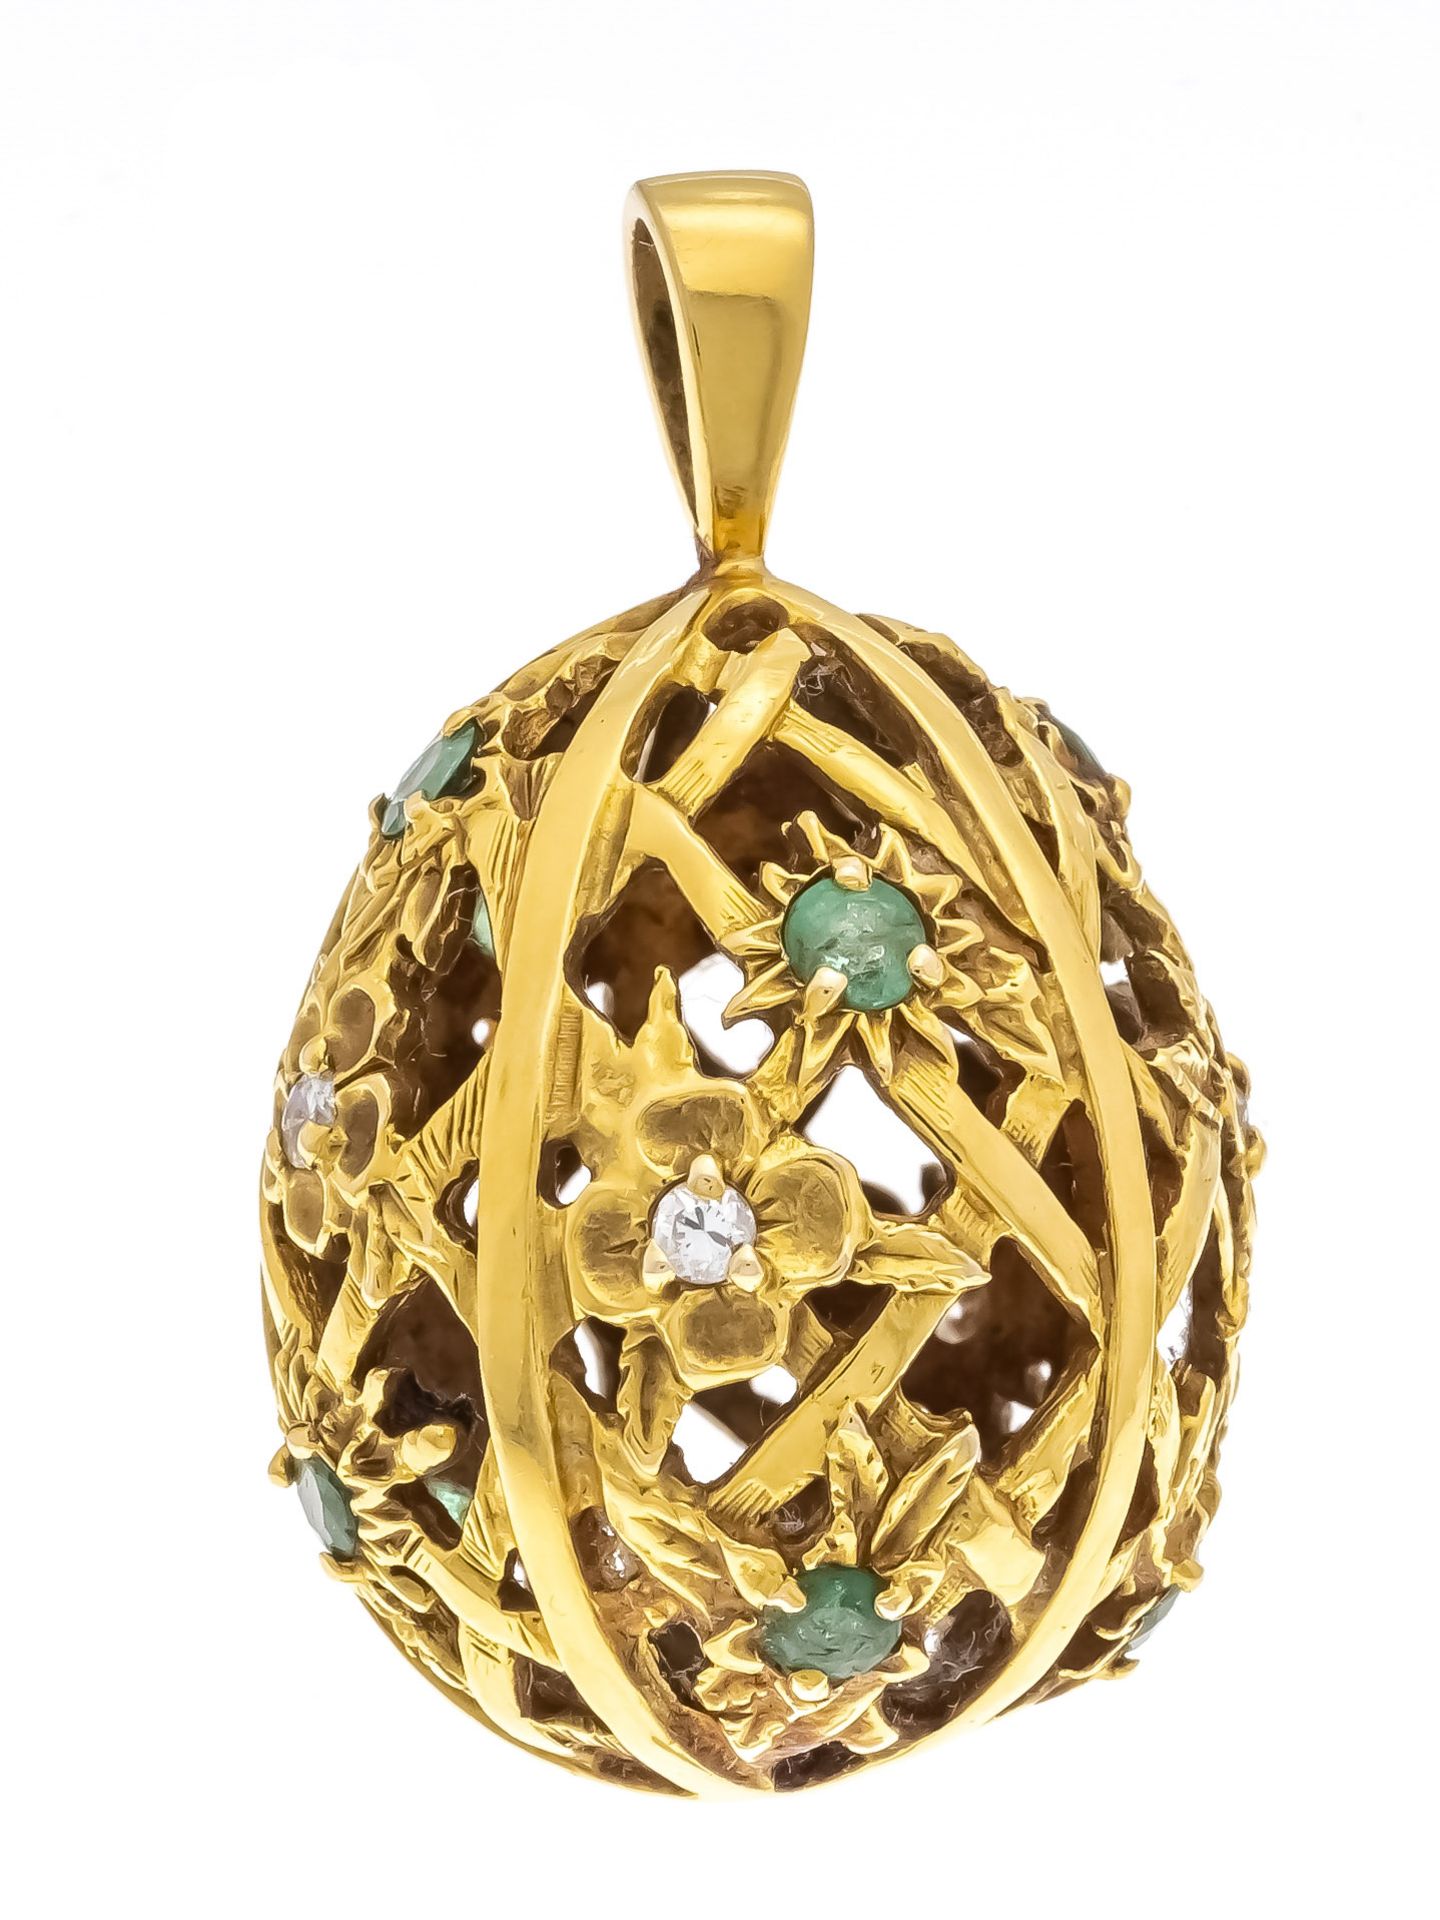 Filigree egg pendant GG 585/000 openwork with 10 round faceted emeralds 2,6 mm and 5 brilliants,